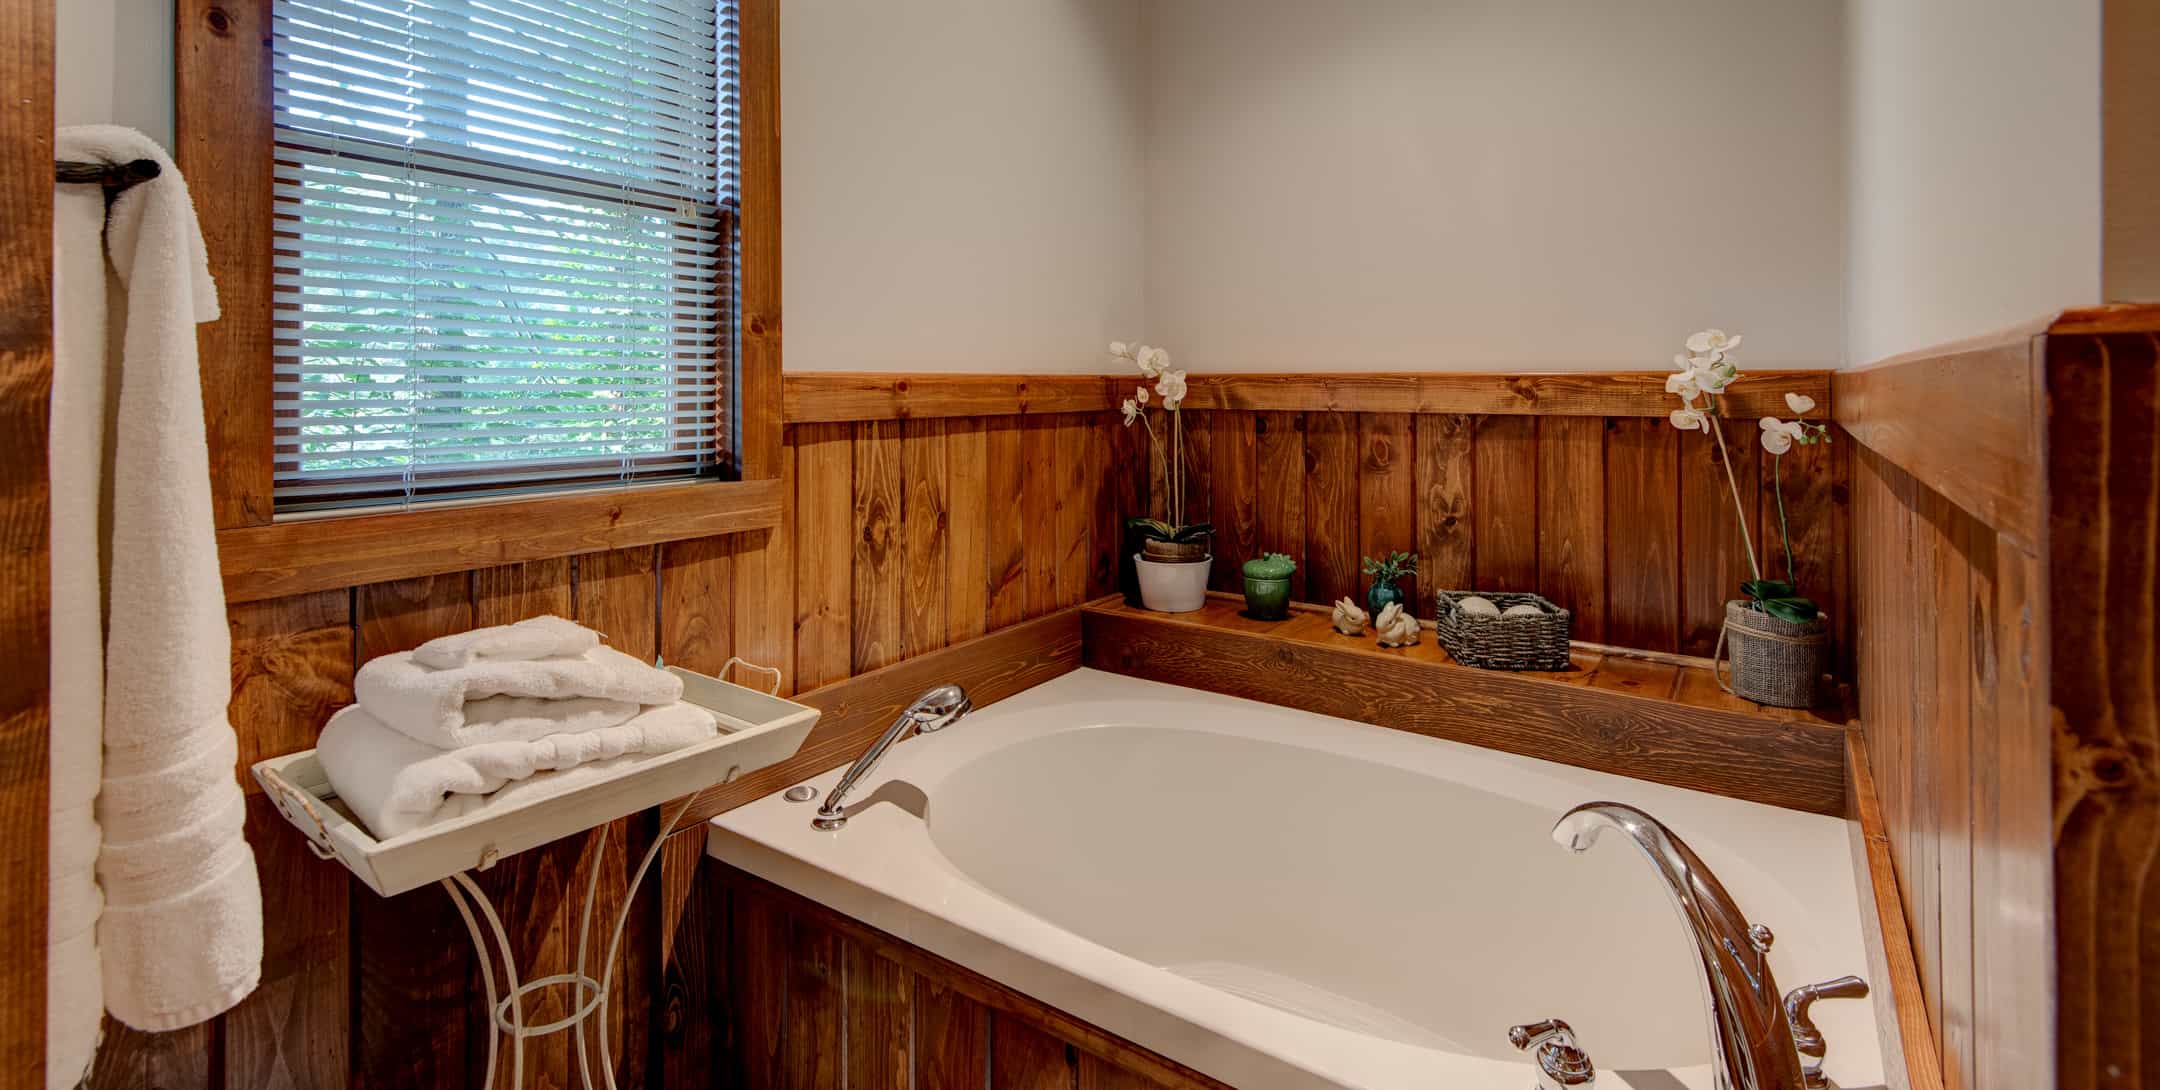 Bathtub in bathroom with wooden accents